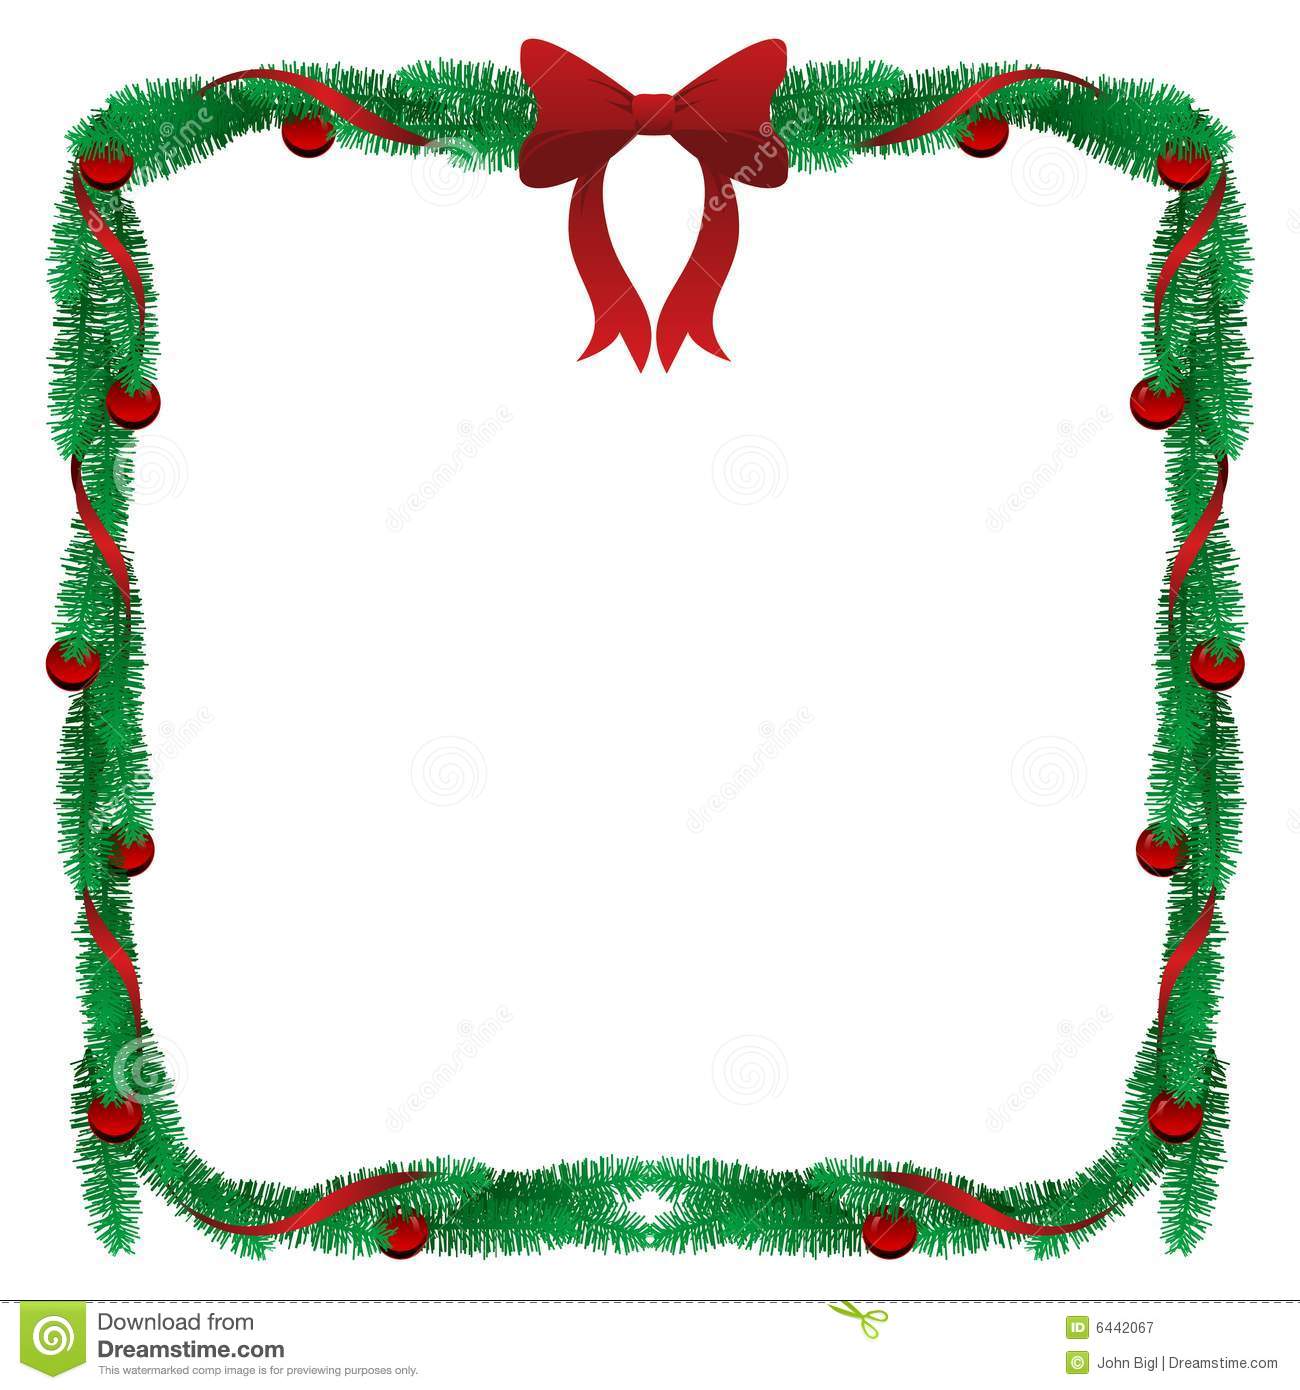 Awesome 10 Christmas Pine Border Clip Art   Decoration